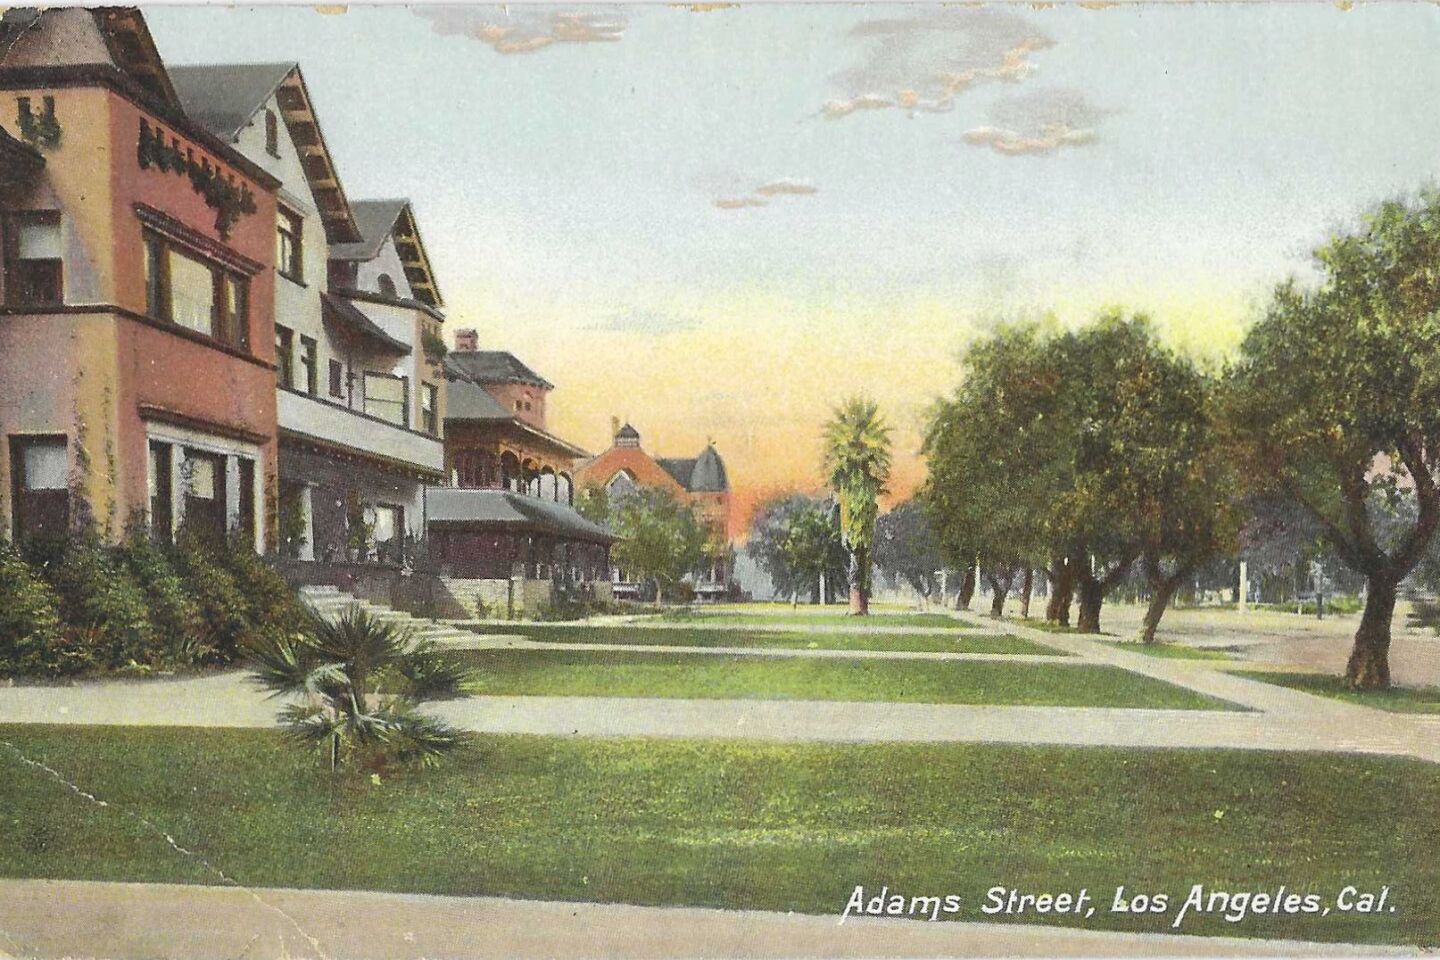 Postcard shows stately homes with large front lawns — "Adams Street, Los Angeles, Cal."